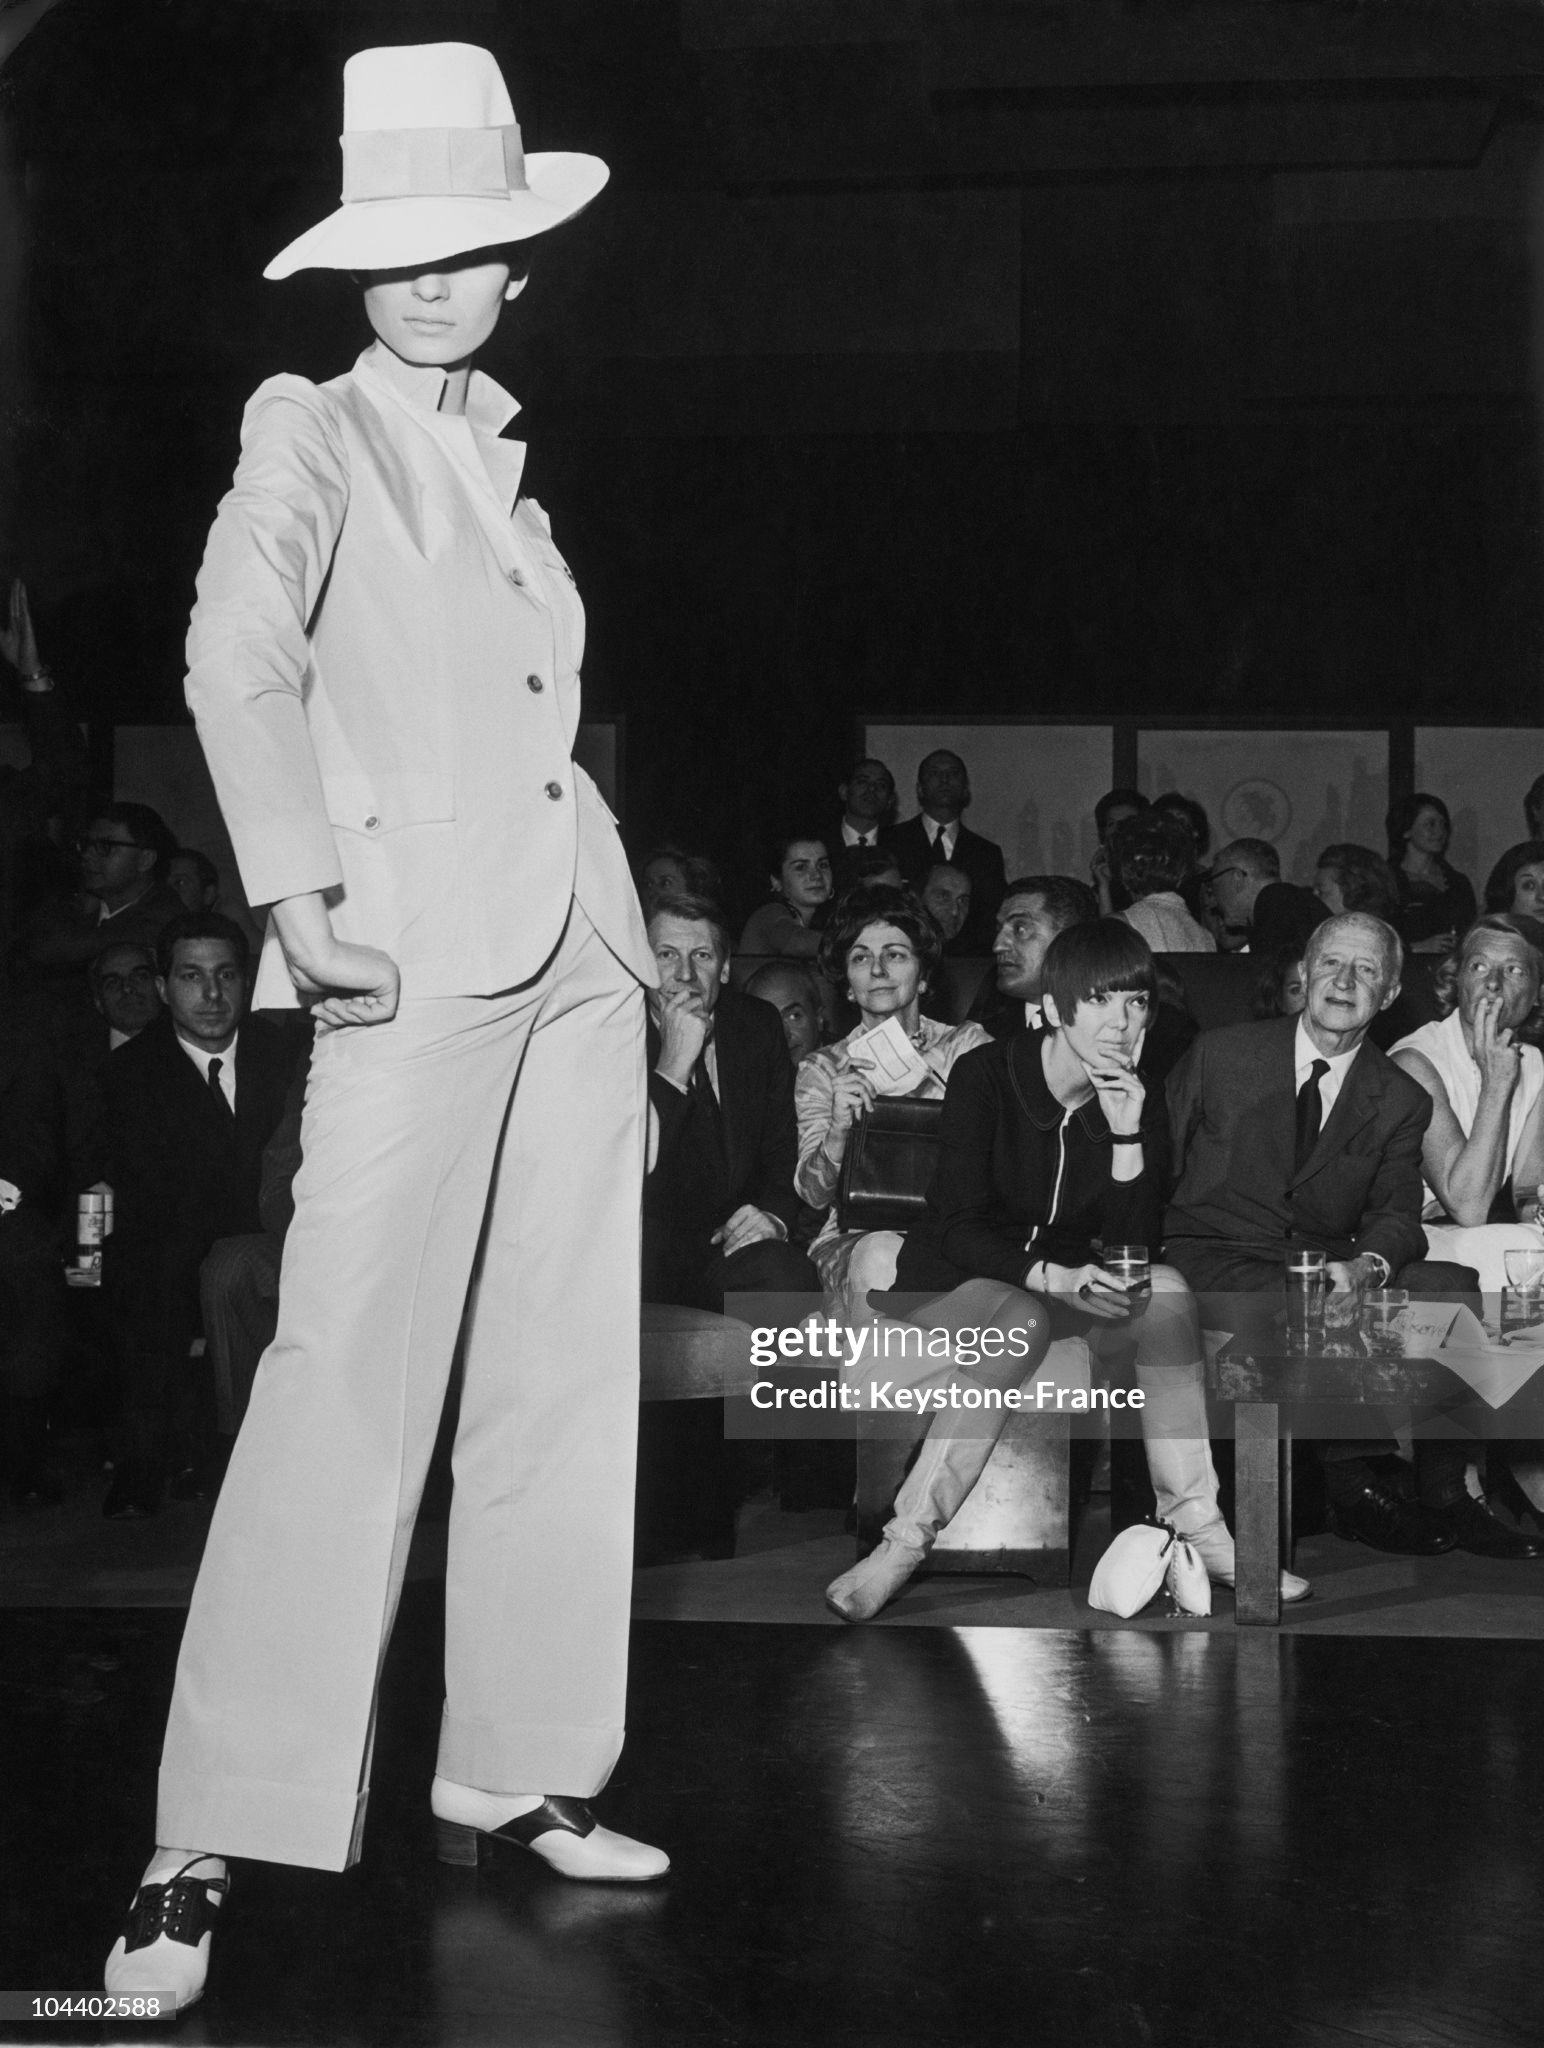 Mary Quant (seated in the background) is presenting a lady's suit from her collection Viva Viva during Milan fashion show in 1967. This suit is composed of a white jacket and baggy pants. The model is also wearing a large boards hat and bicolored shoes with a light heel. 